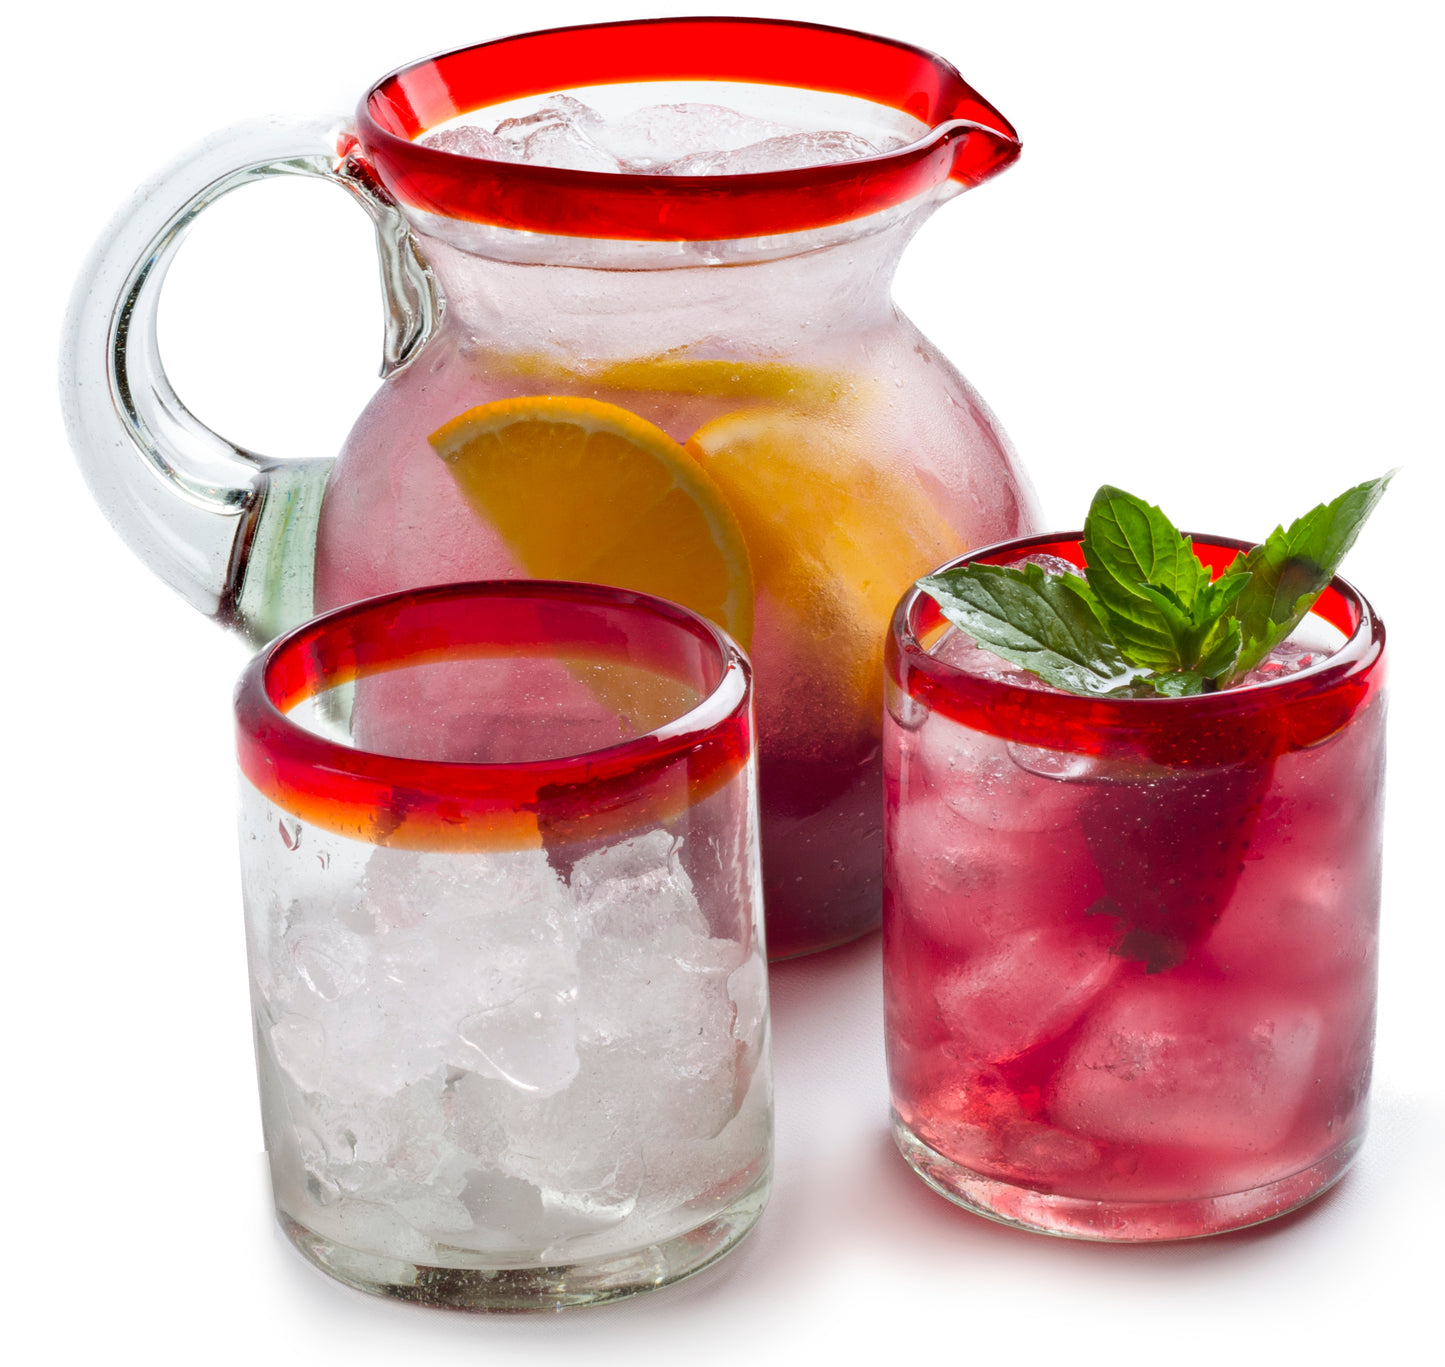 Red Rim Tumblers & Matching Pitcher - Sangria Gift Set - Orion's Table 